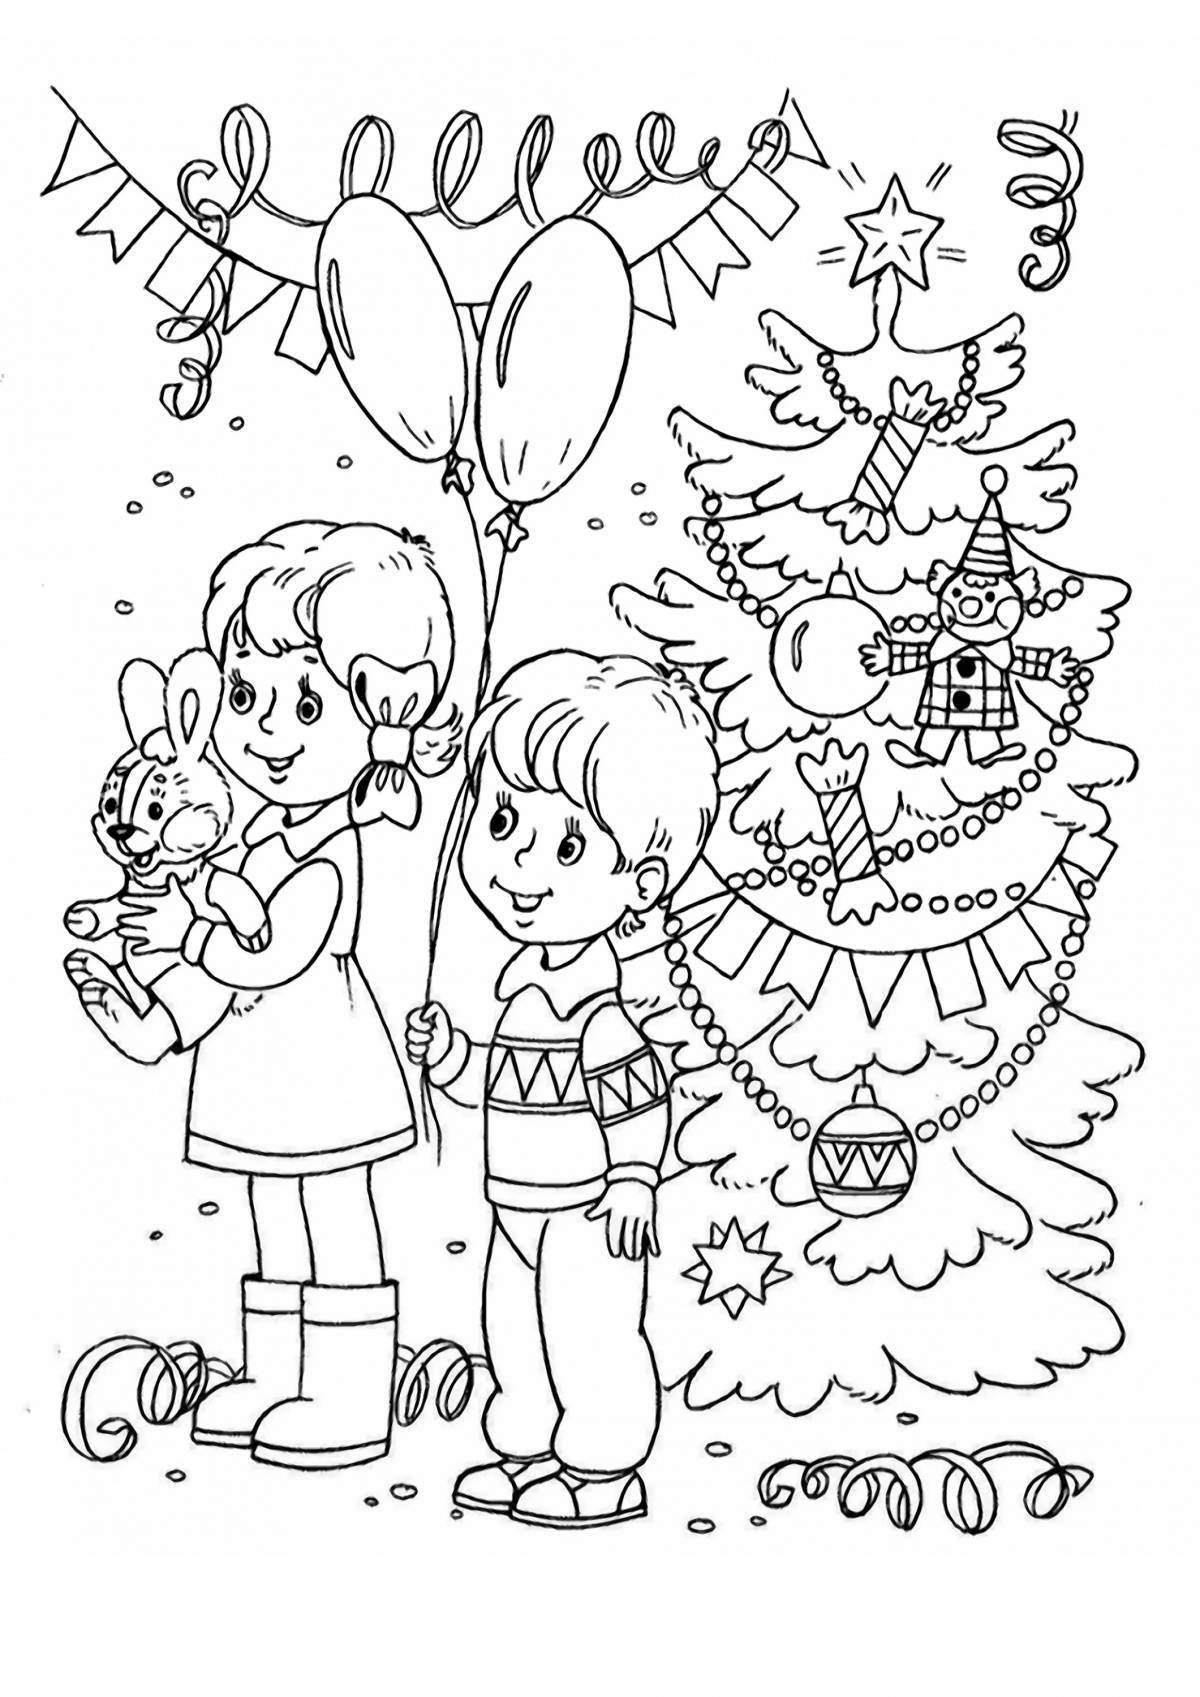 Playful Christmas coloring book for 8-9 year olds